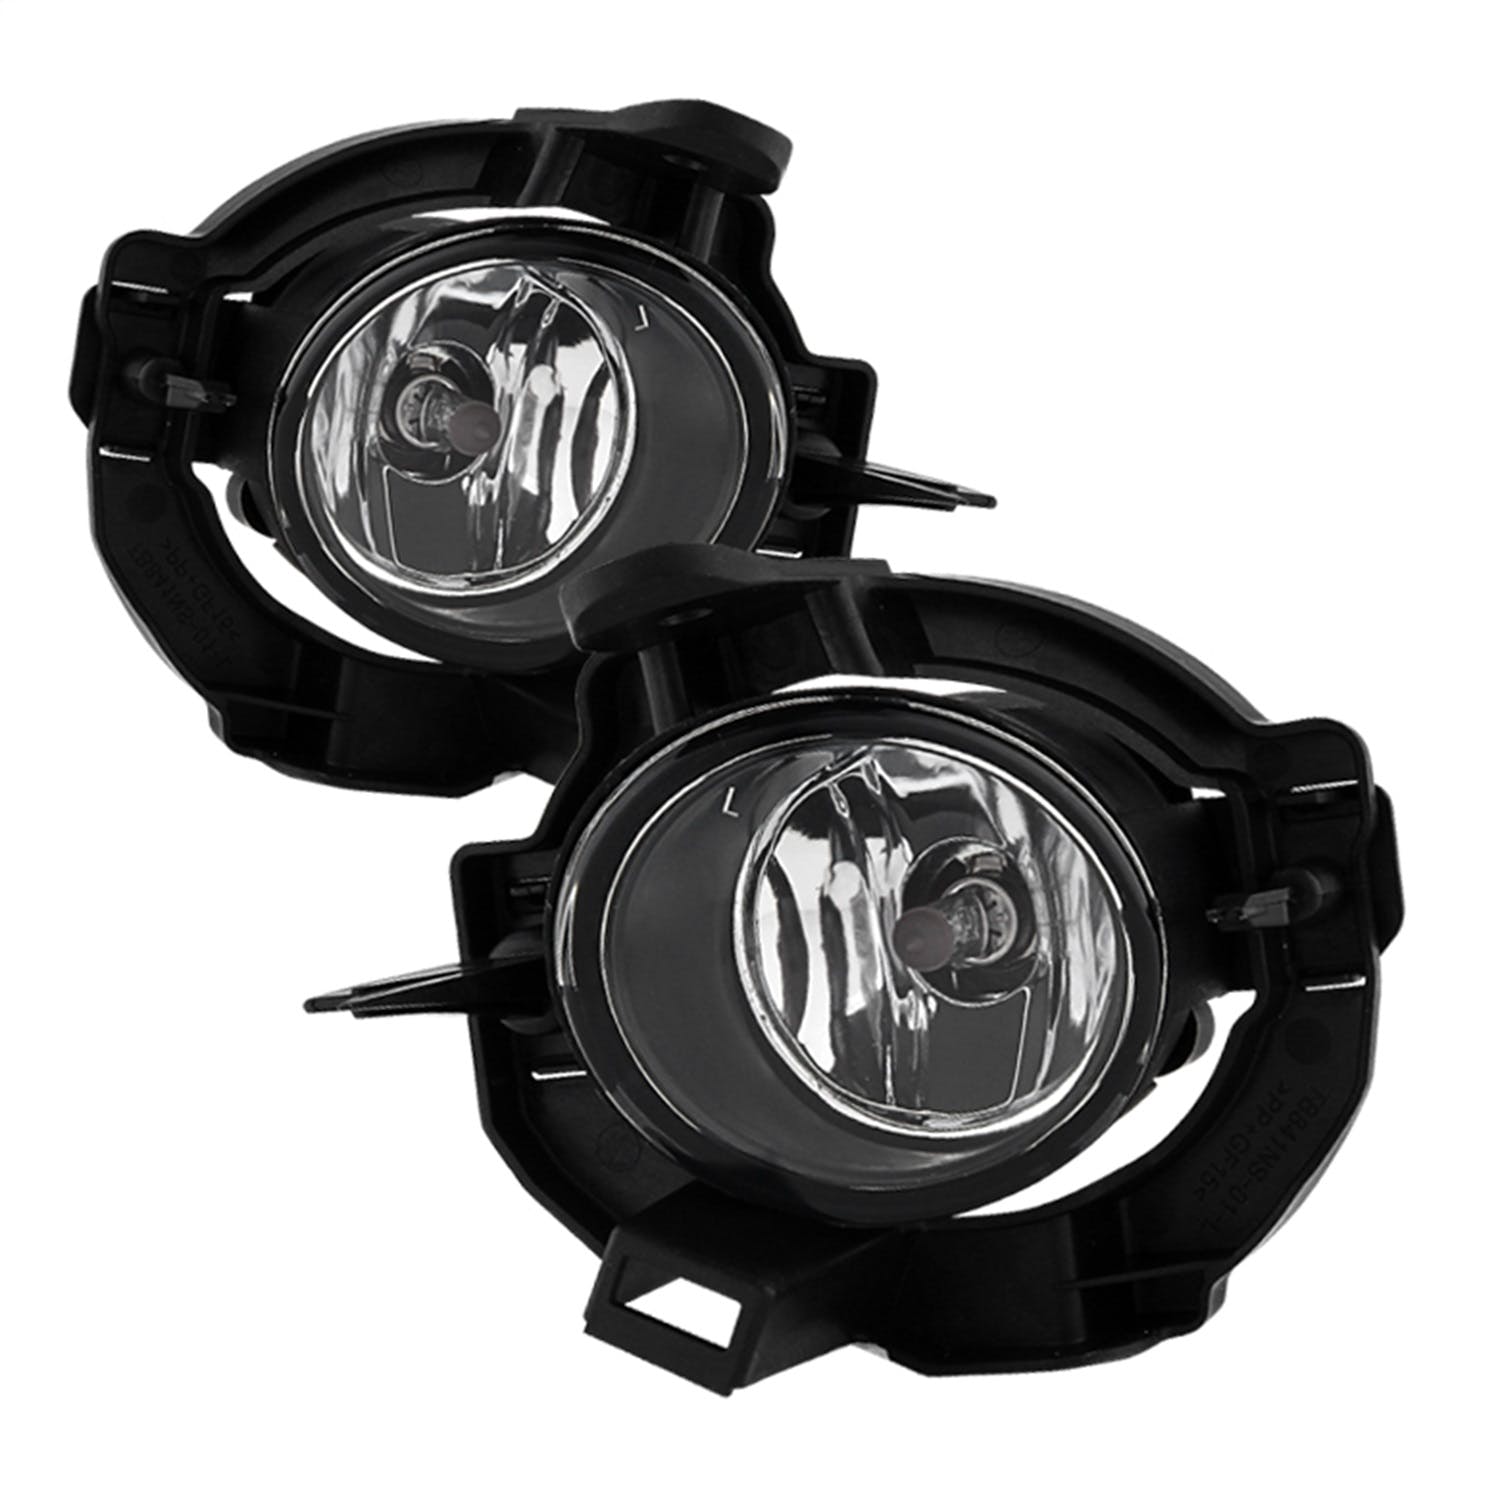 Spyder Auto 9031625 (Spyder) Nissan Rogue 2008-2013 OEM Fog Lights W/Cover and Switch-Clear